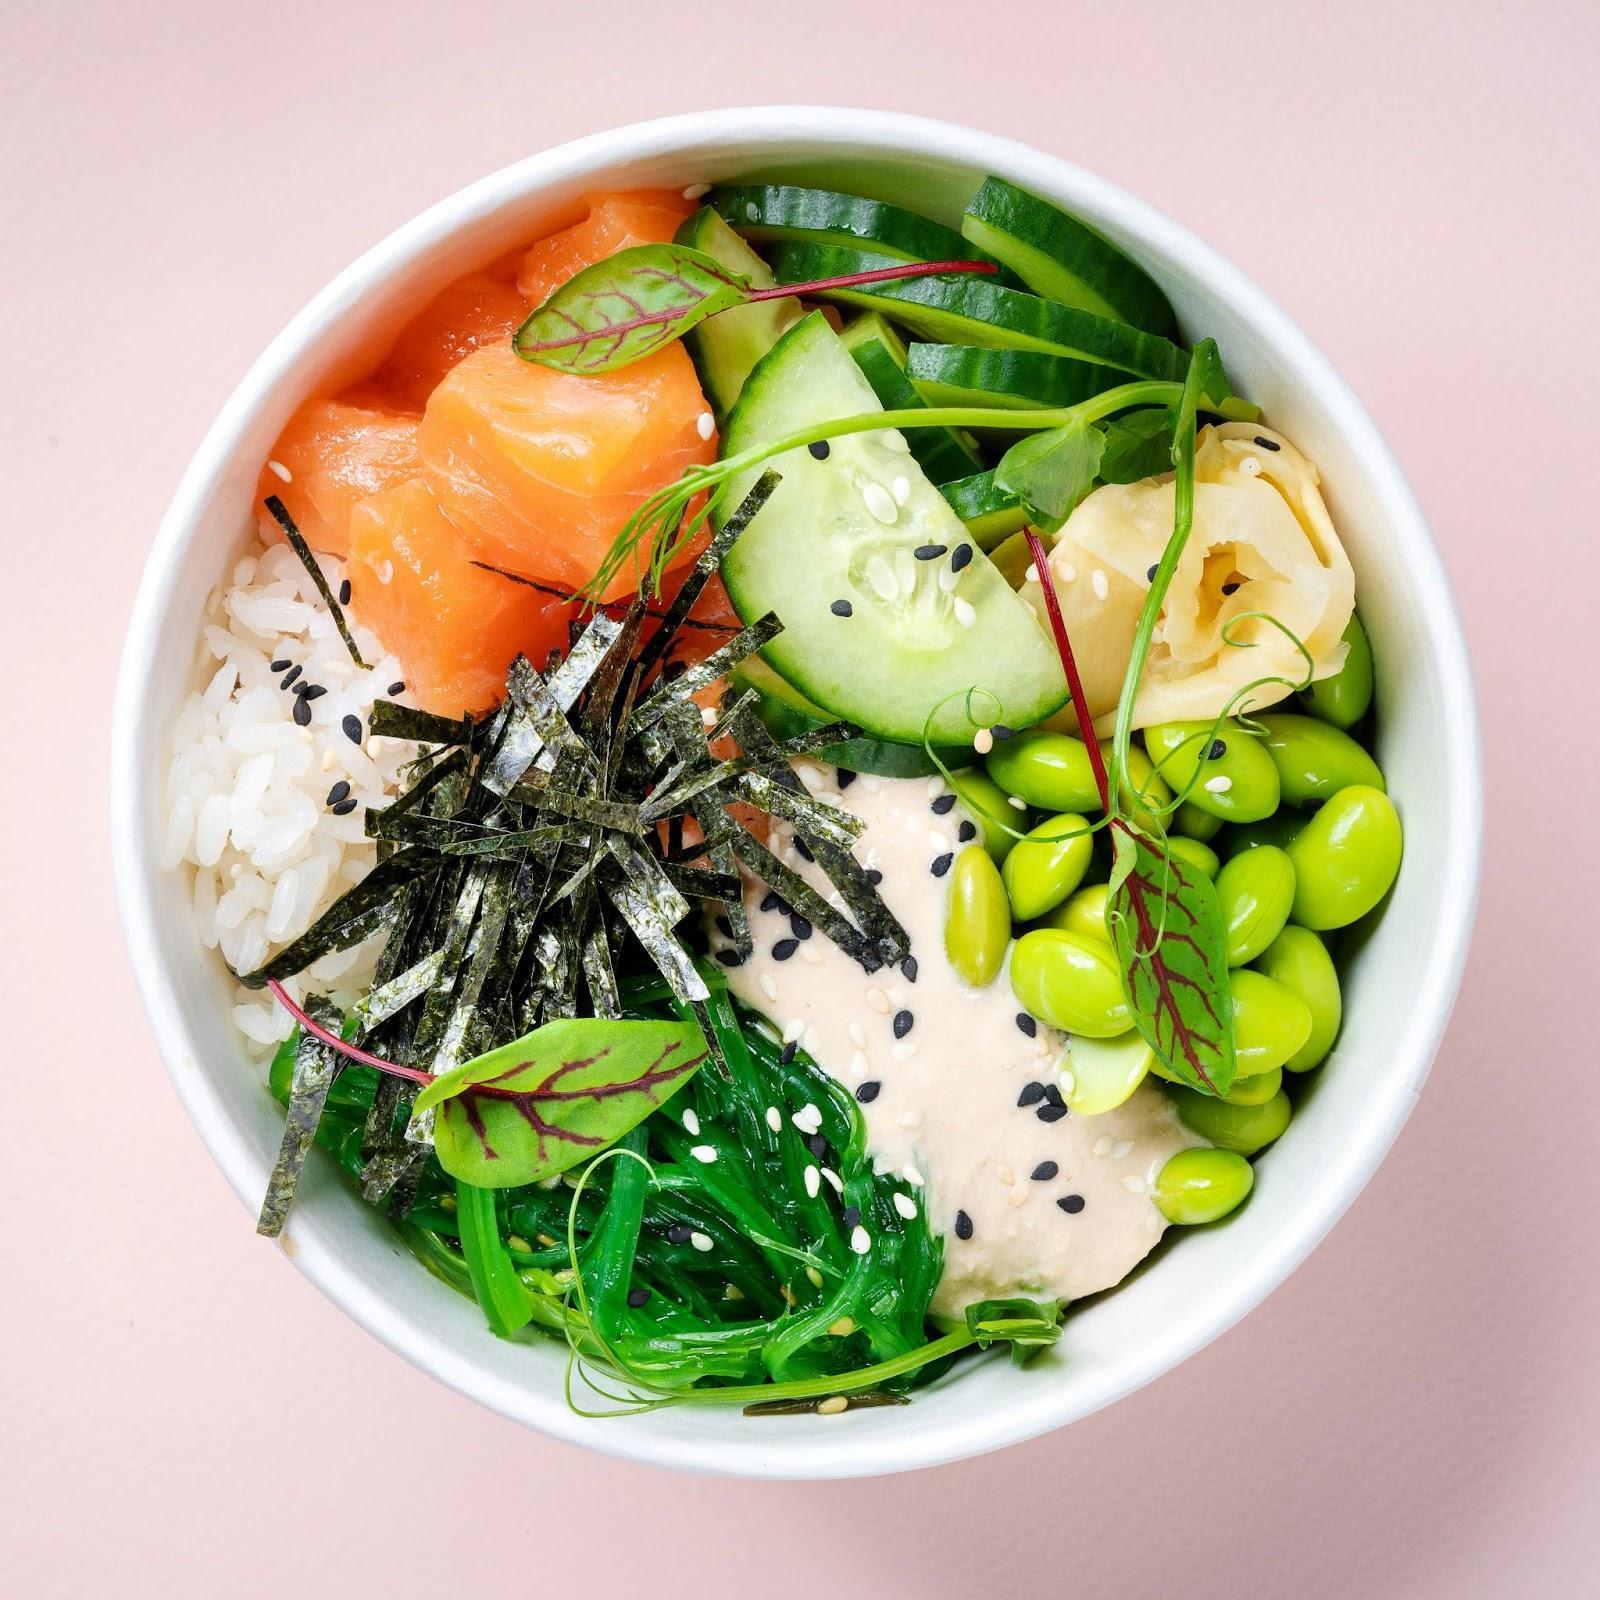 This salmon rice bowl is the ultimate answer to ‘What’s for dinner?’ without the fuss